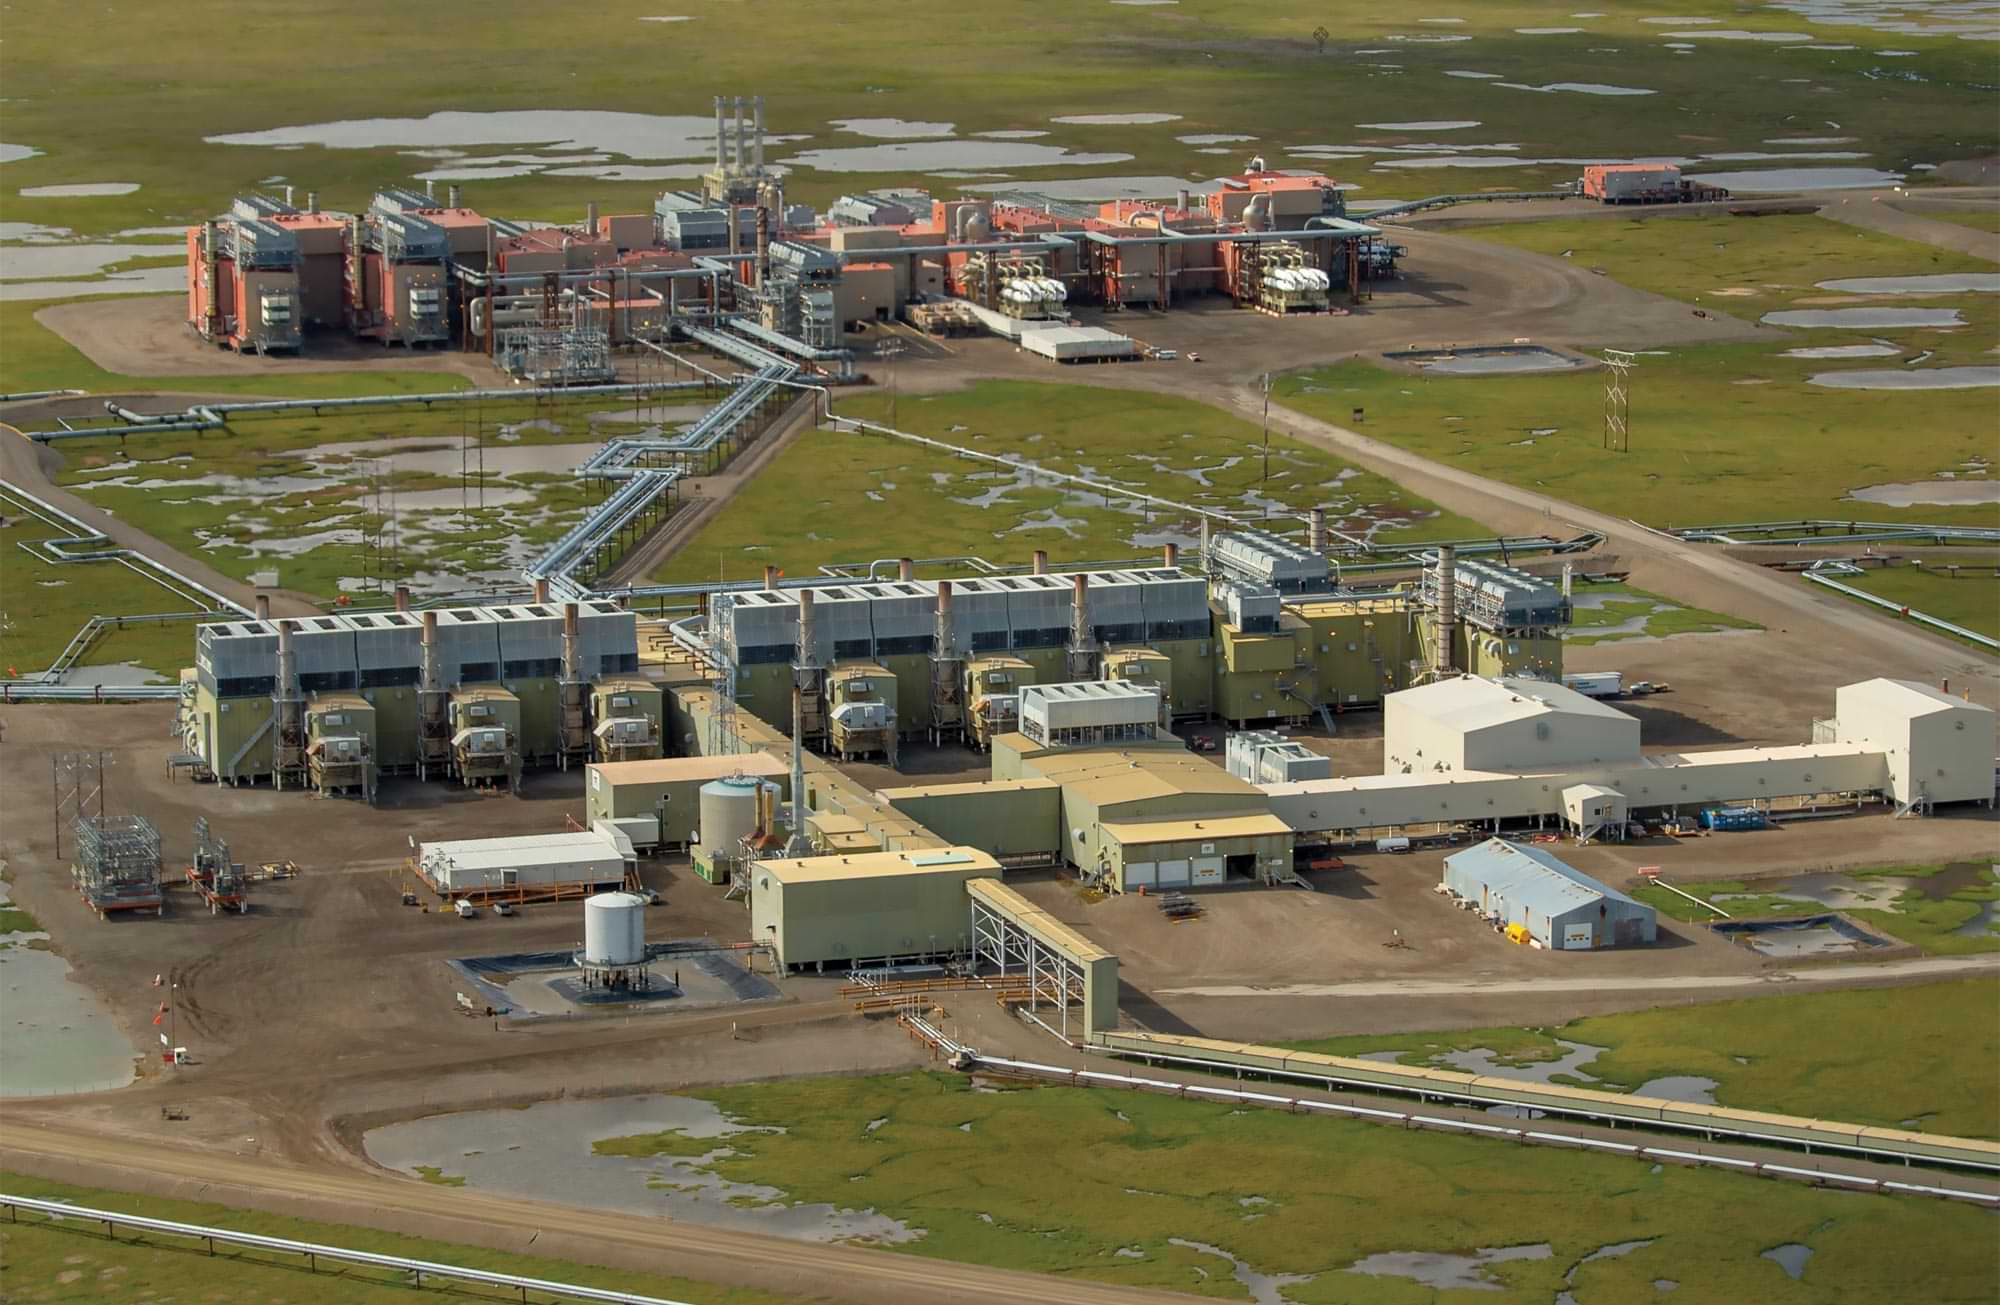 aerial view of the Central Compression Plant (foreground) and Central Gas Facility (background) at Prudhoe Bay